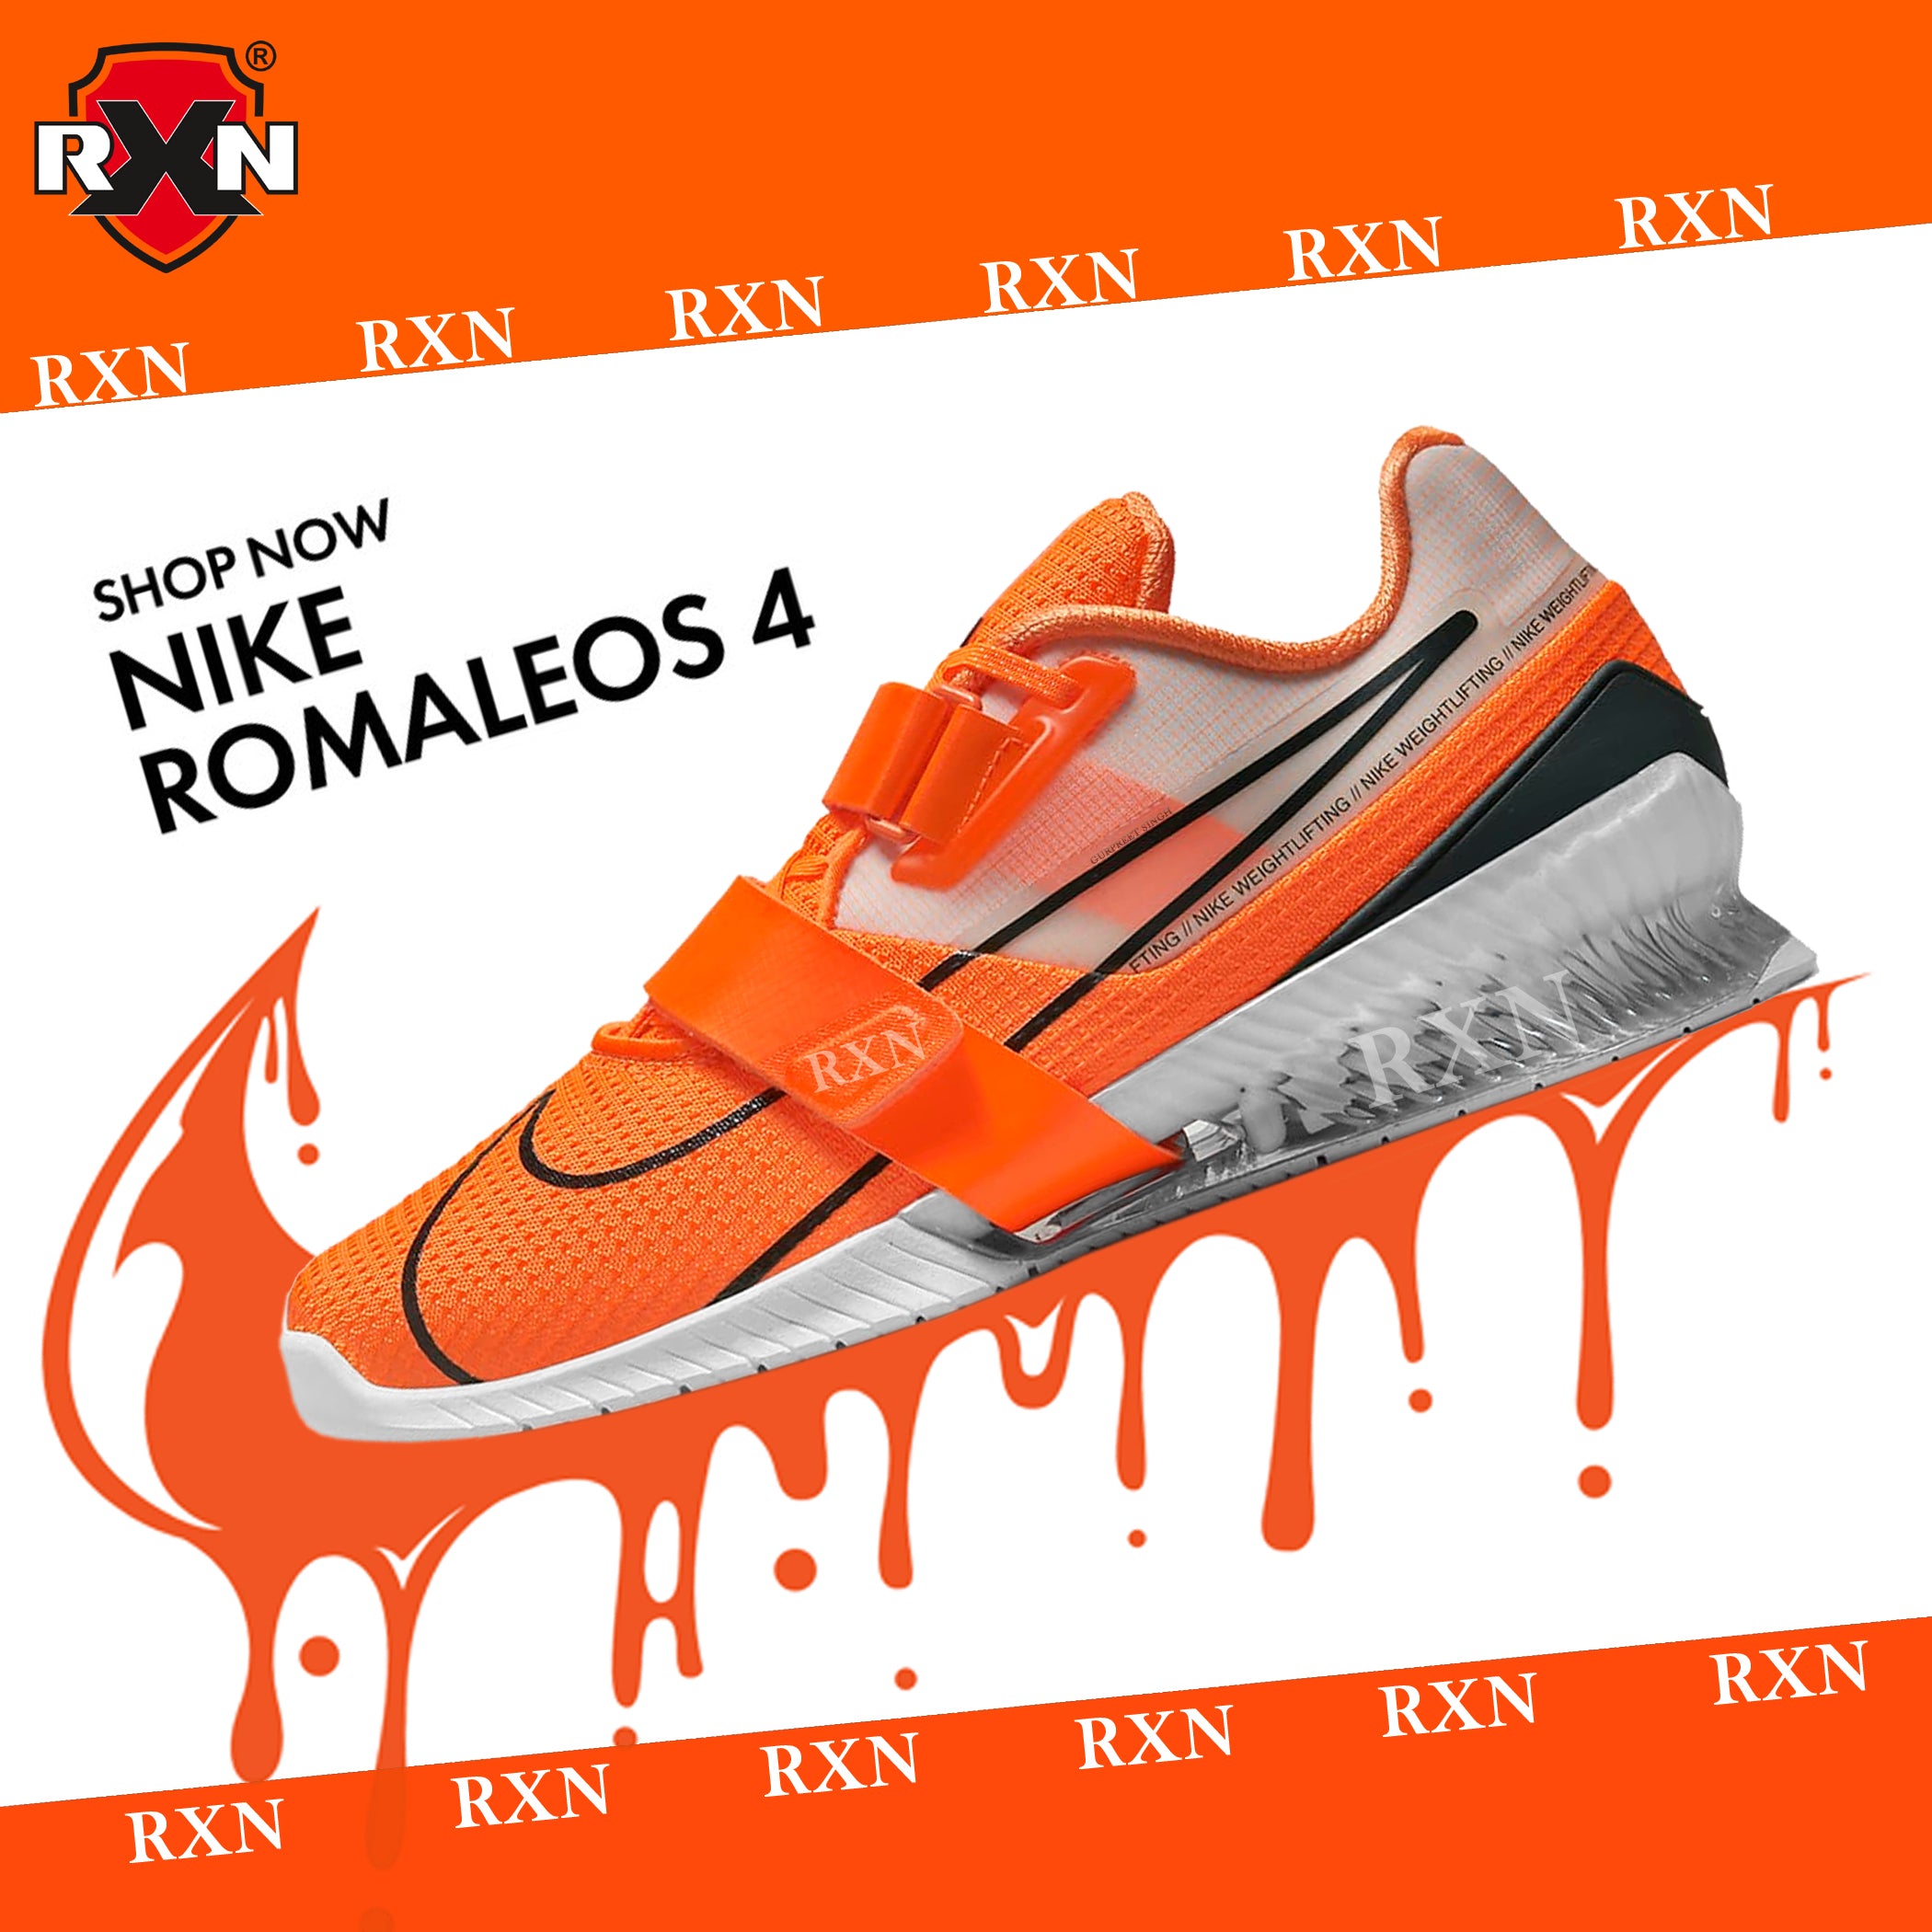 Romaleos 4 Weightlifting Shoes – RXN SPORTS